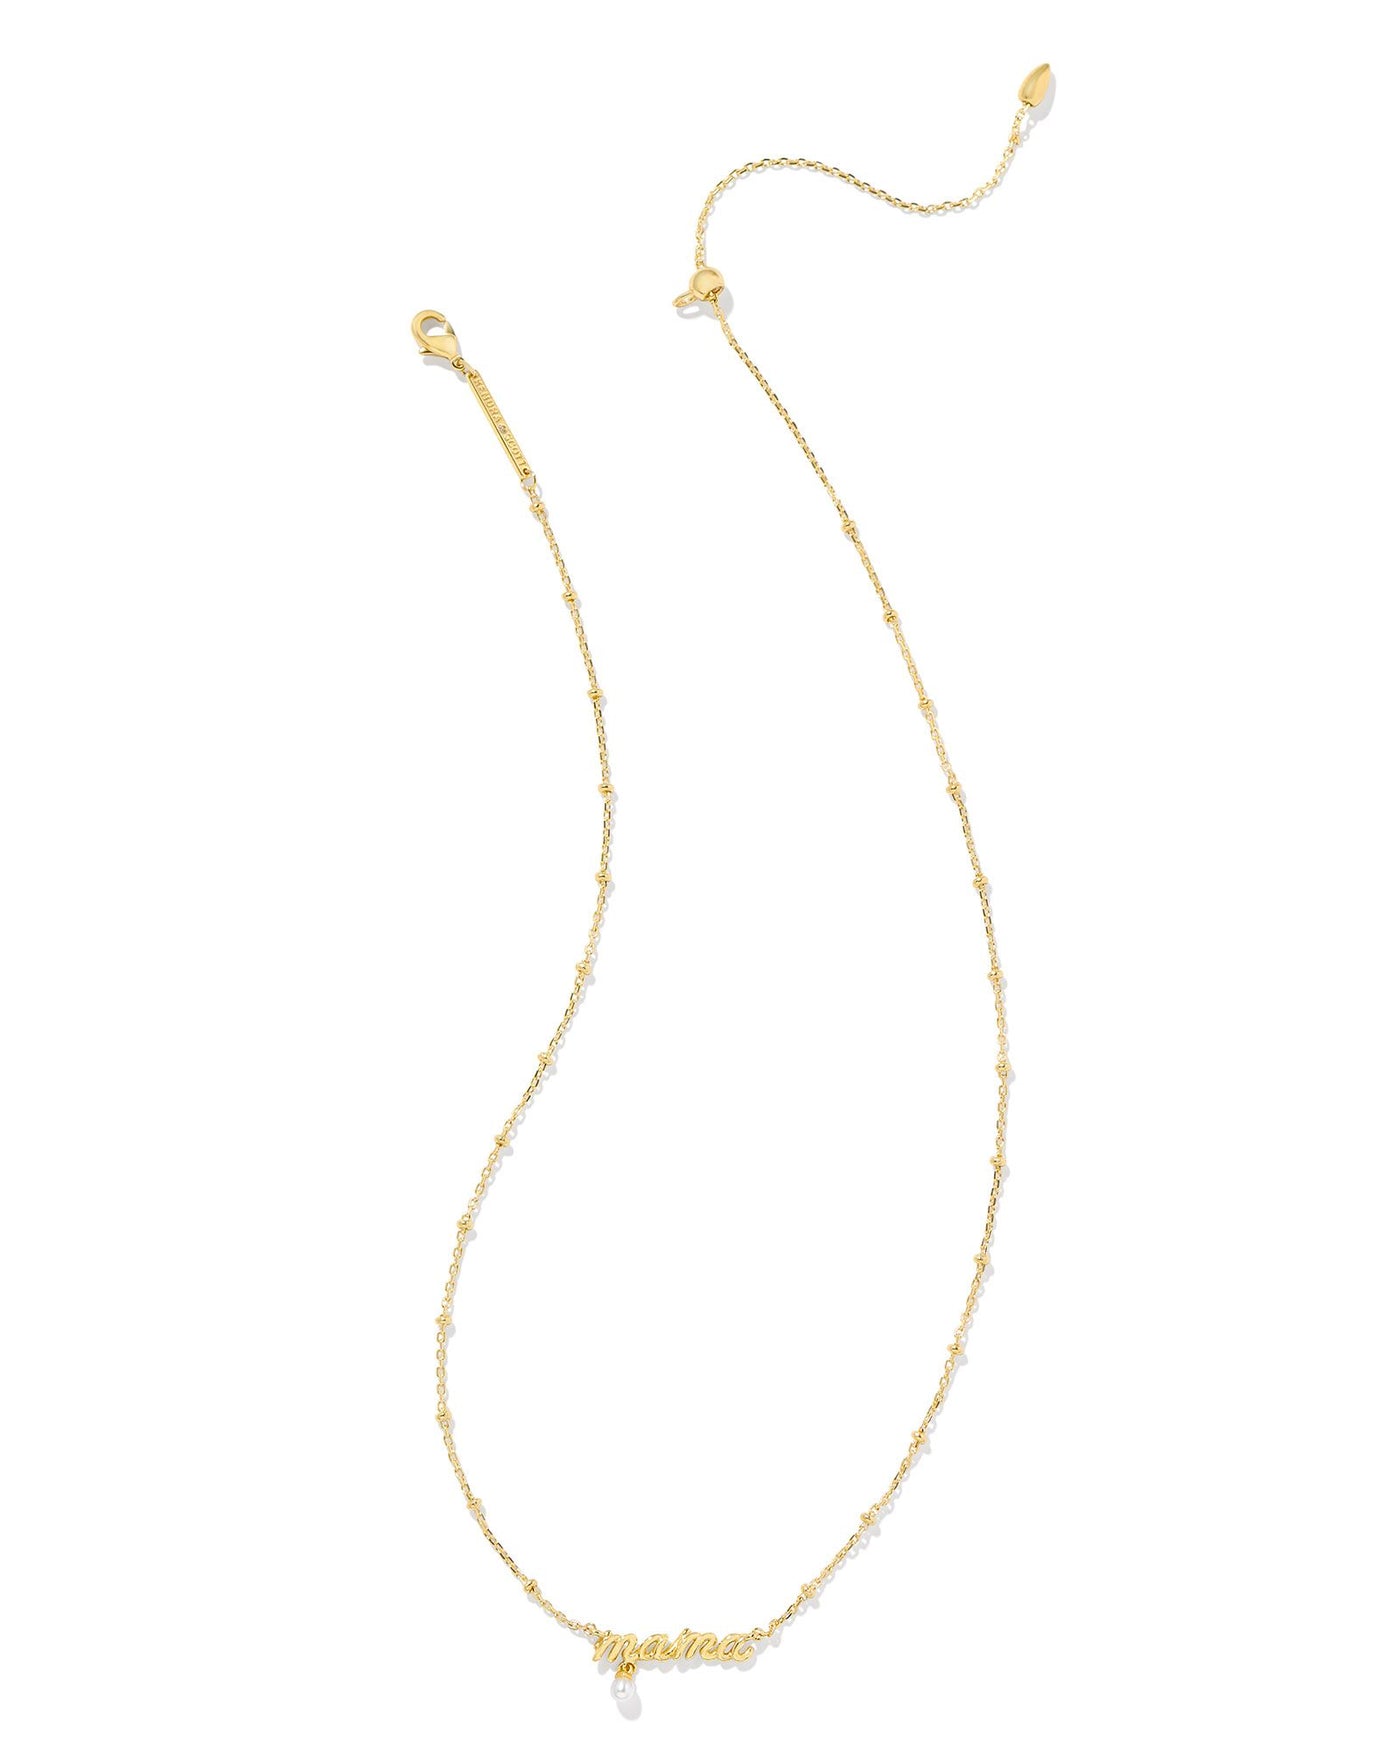 Kendra Scott Mama Pendant Necklace-Necklaces-Kendra Scott-Market Street Nest, Fashionable Clothing, Shoes and Home Décor Located in Mabank, TX